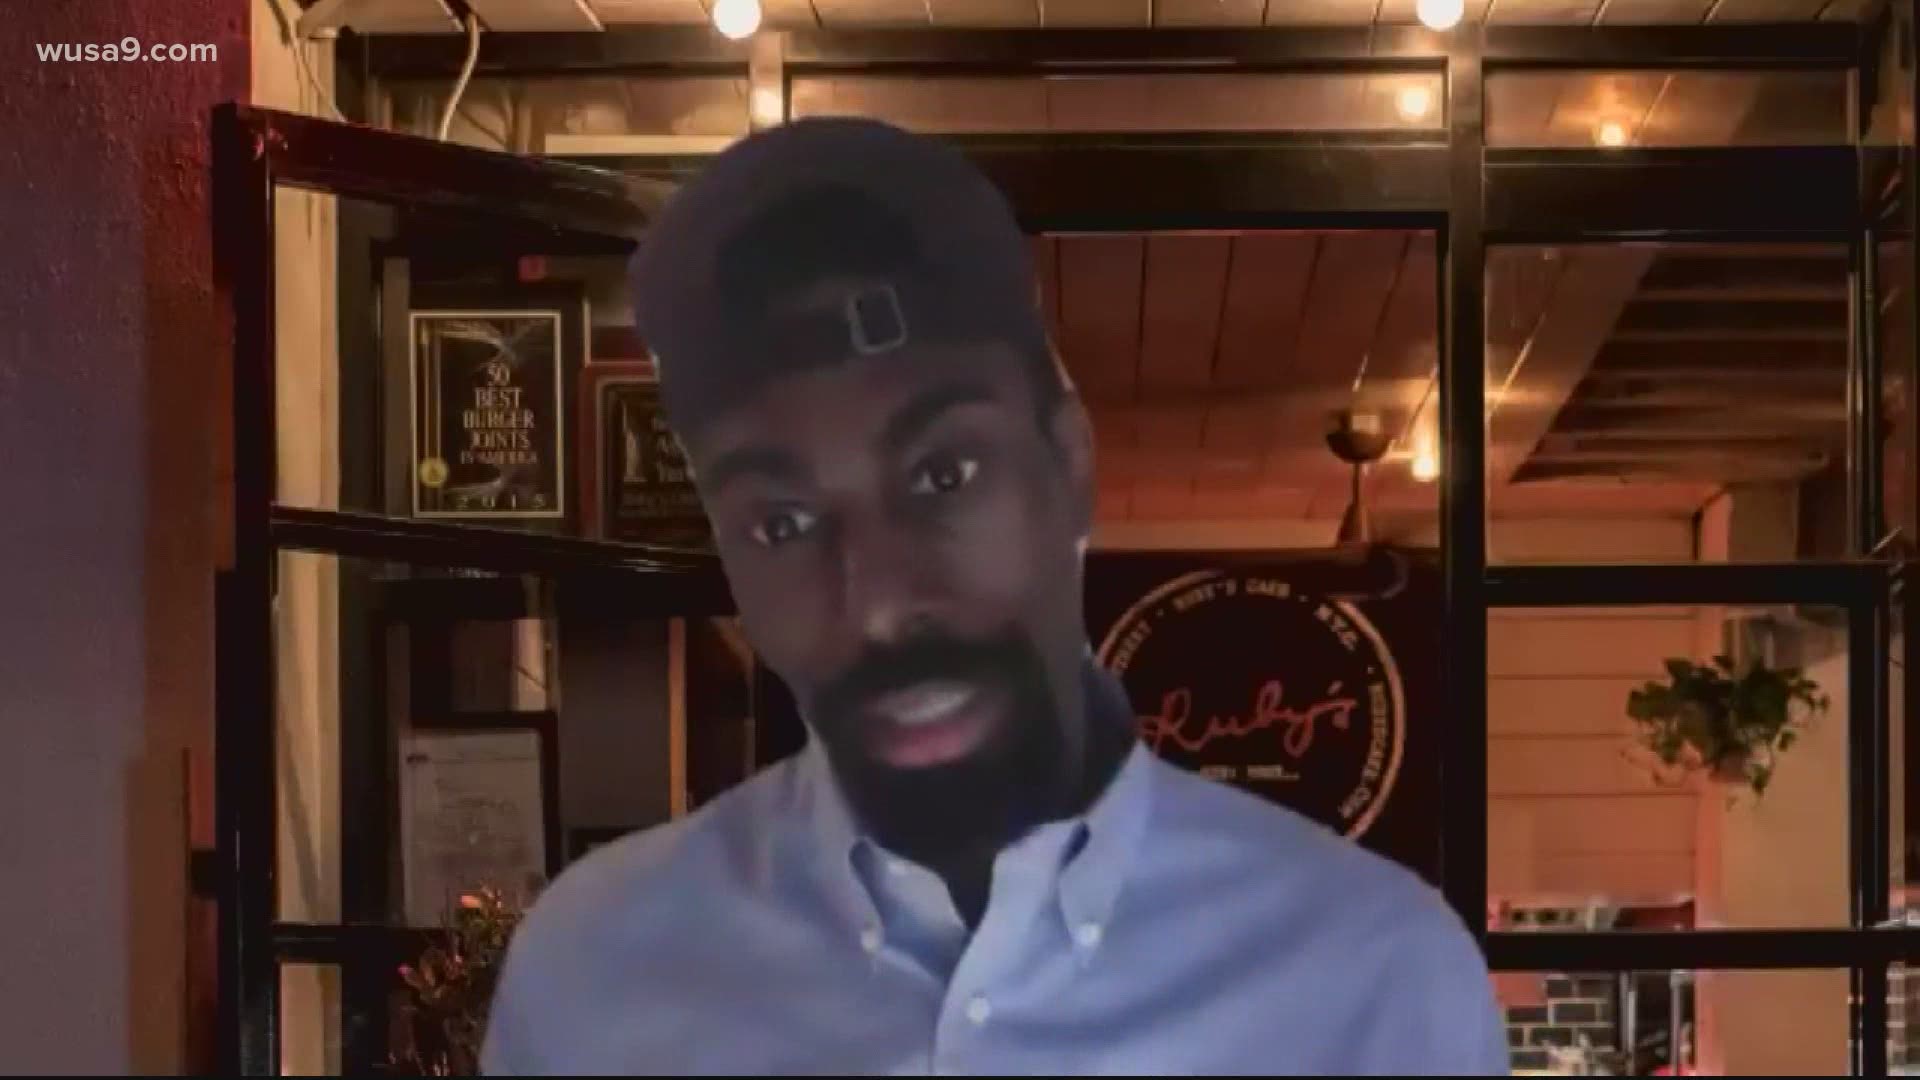 Officer Derek Chauvin is charged with third degree murder and manslaughter in George Floyd's death. Community Activist Deray McKesson weighs in on The Q and A